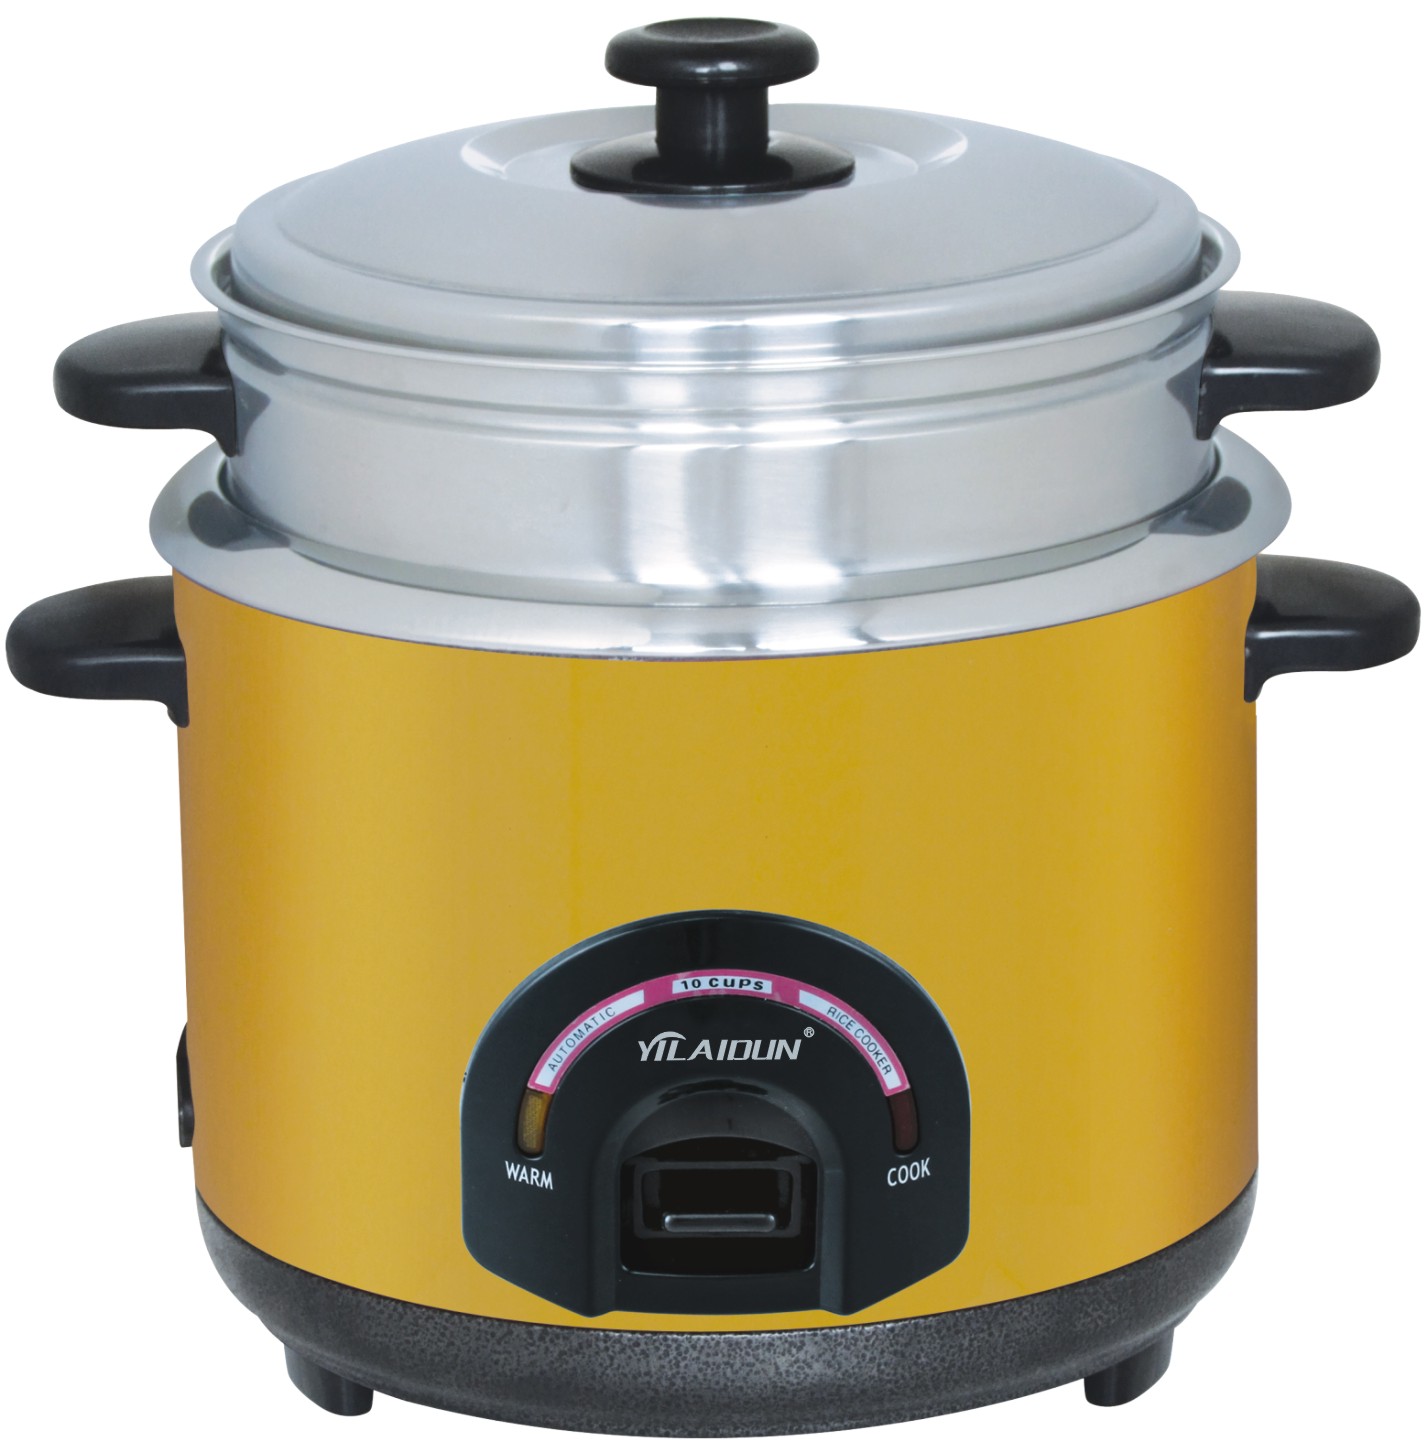 Classical Rice Cooker Series